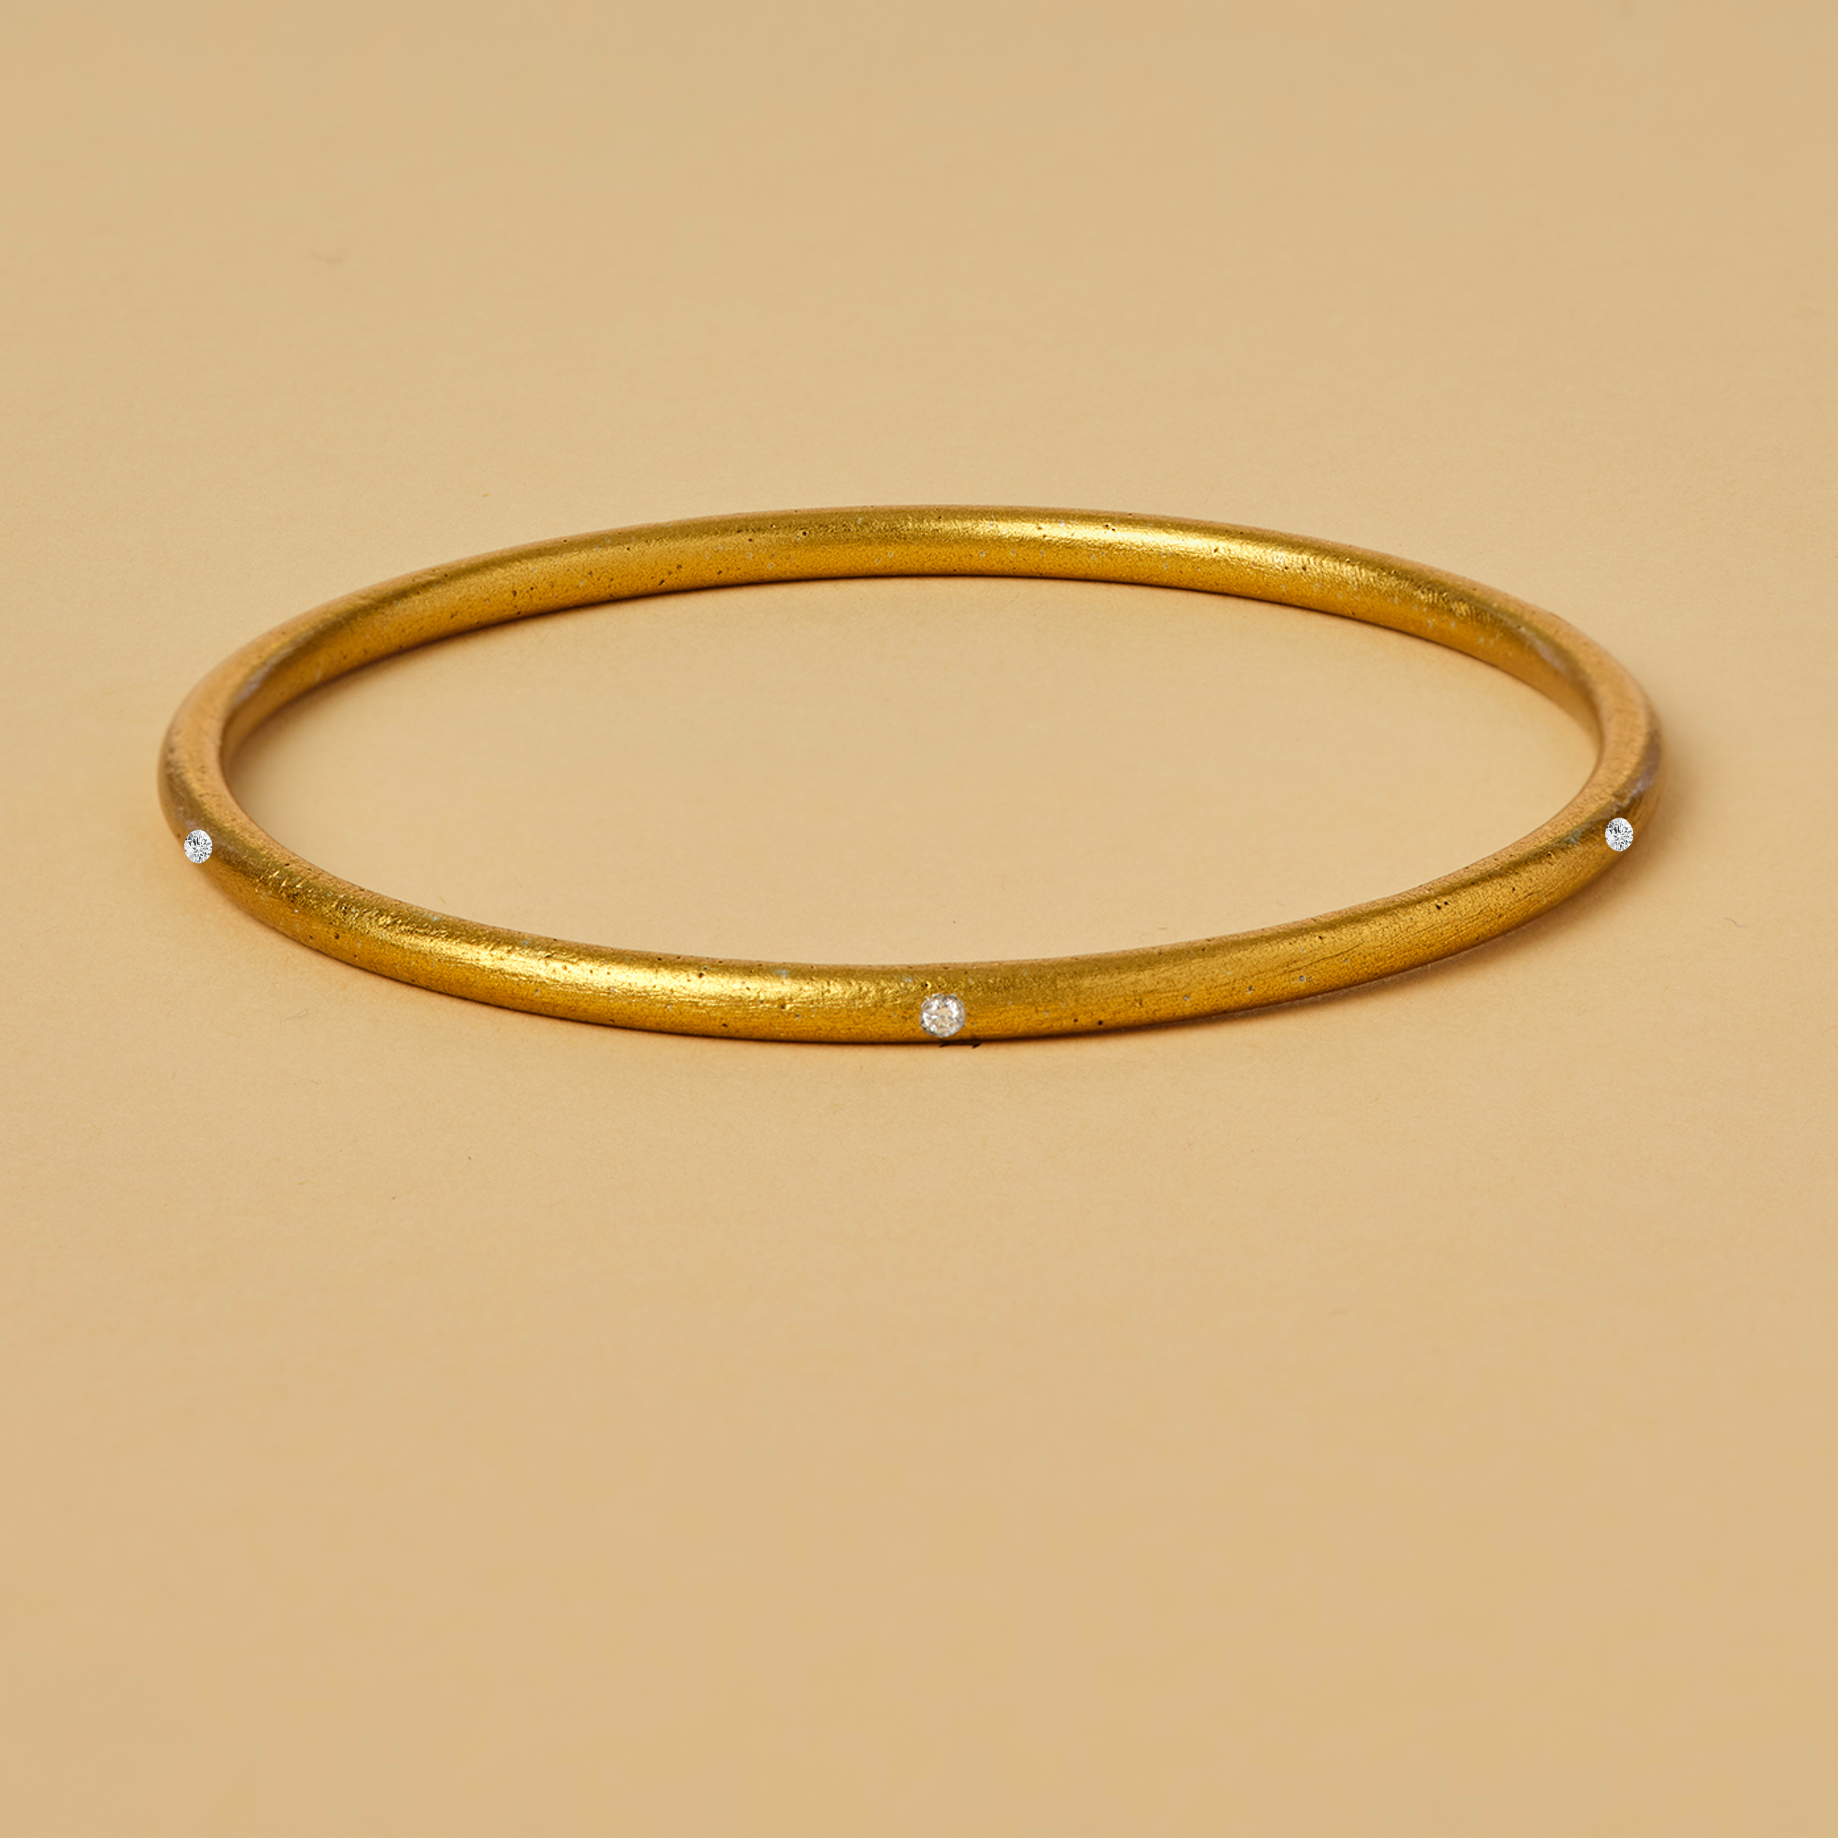 LOVE IS THE BOMB 7 DIAMOND BANGLE: A Symbol of Love, Peace, and Hope